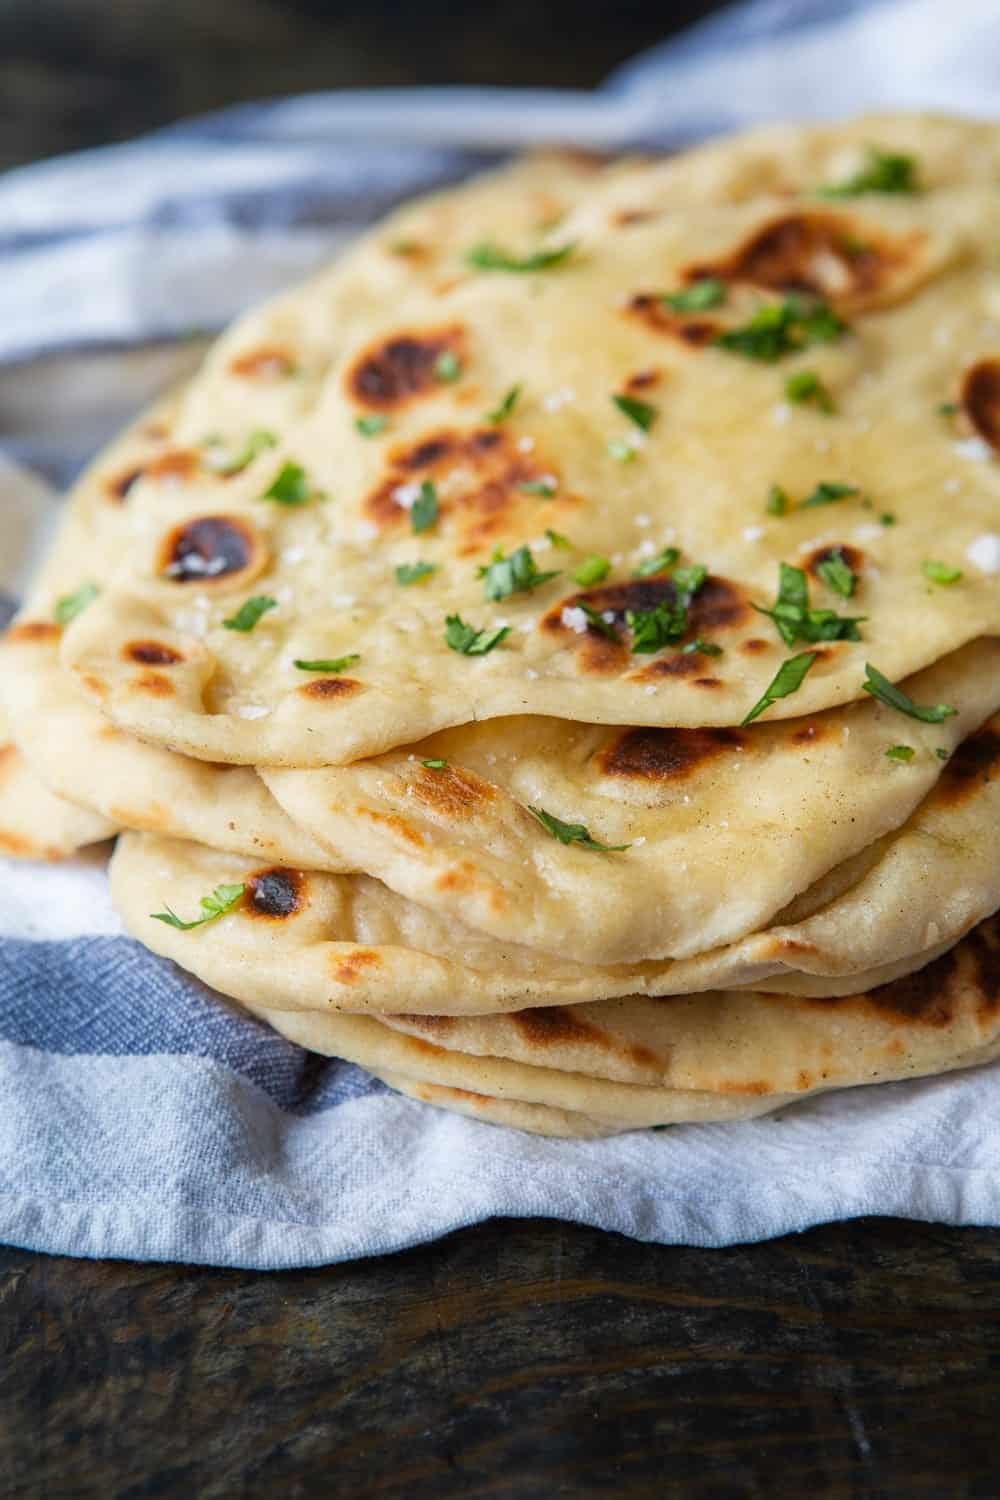 naan from the side